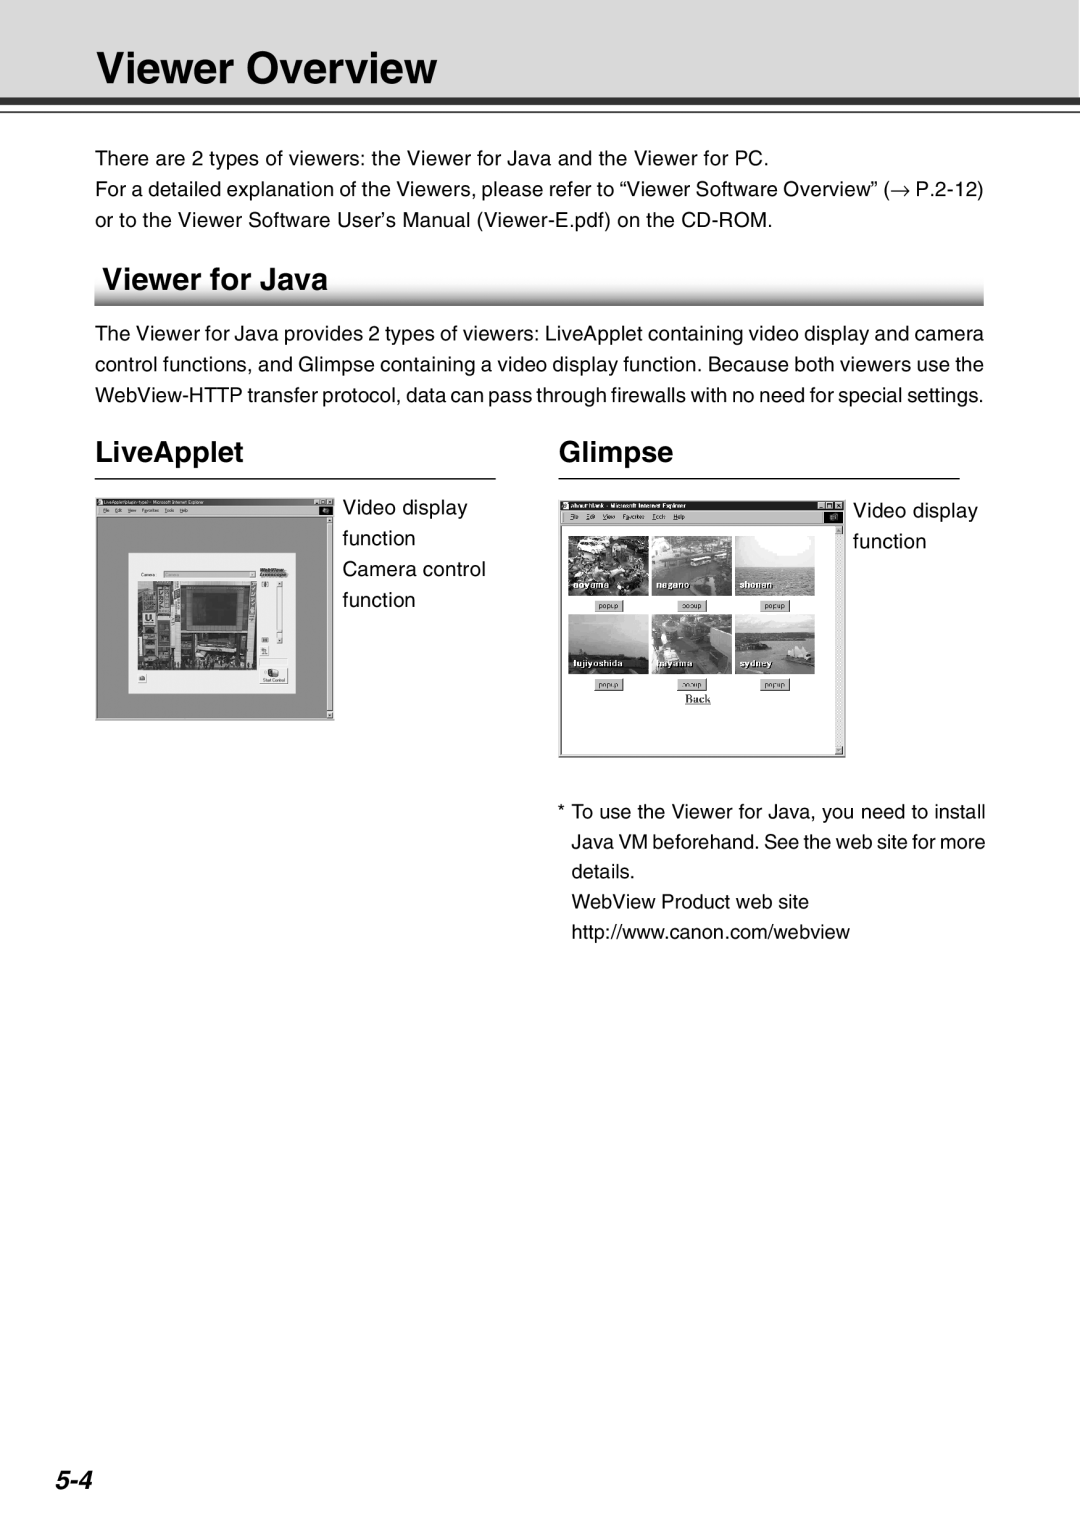 Canon Vb-C50fi user manual Viewer Overview, Viewer for Java, LiveApplet, Glimpse 